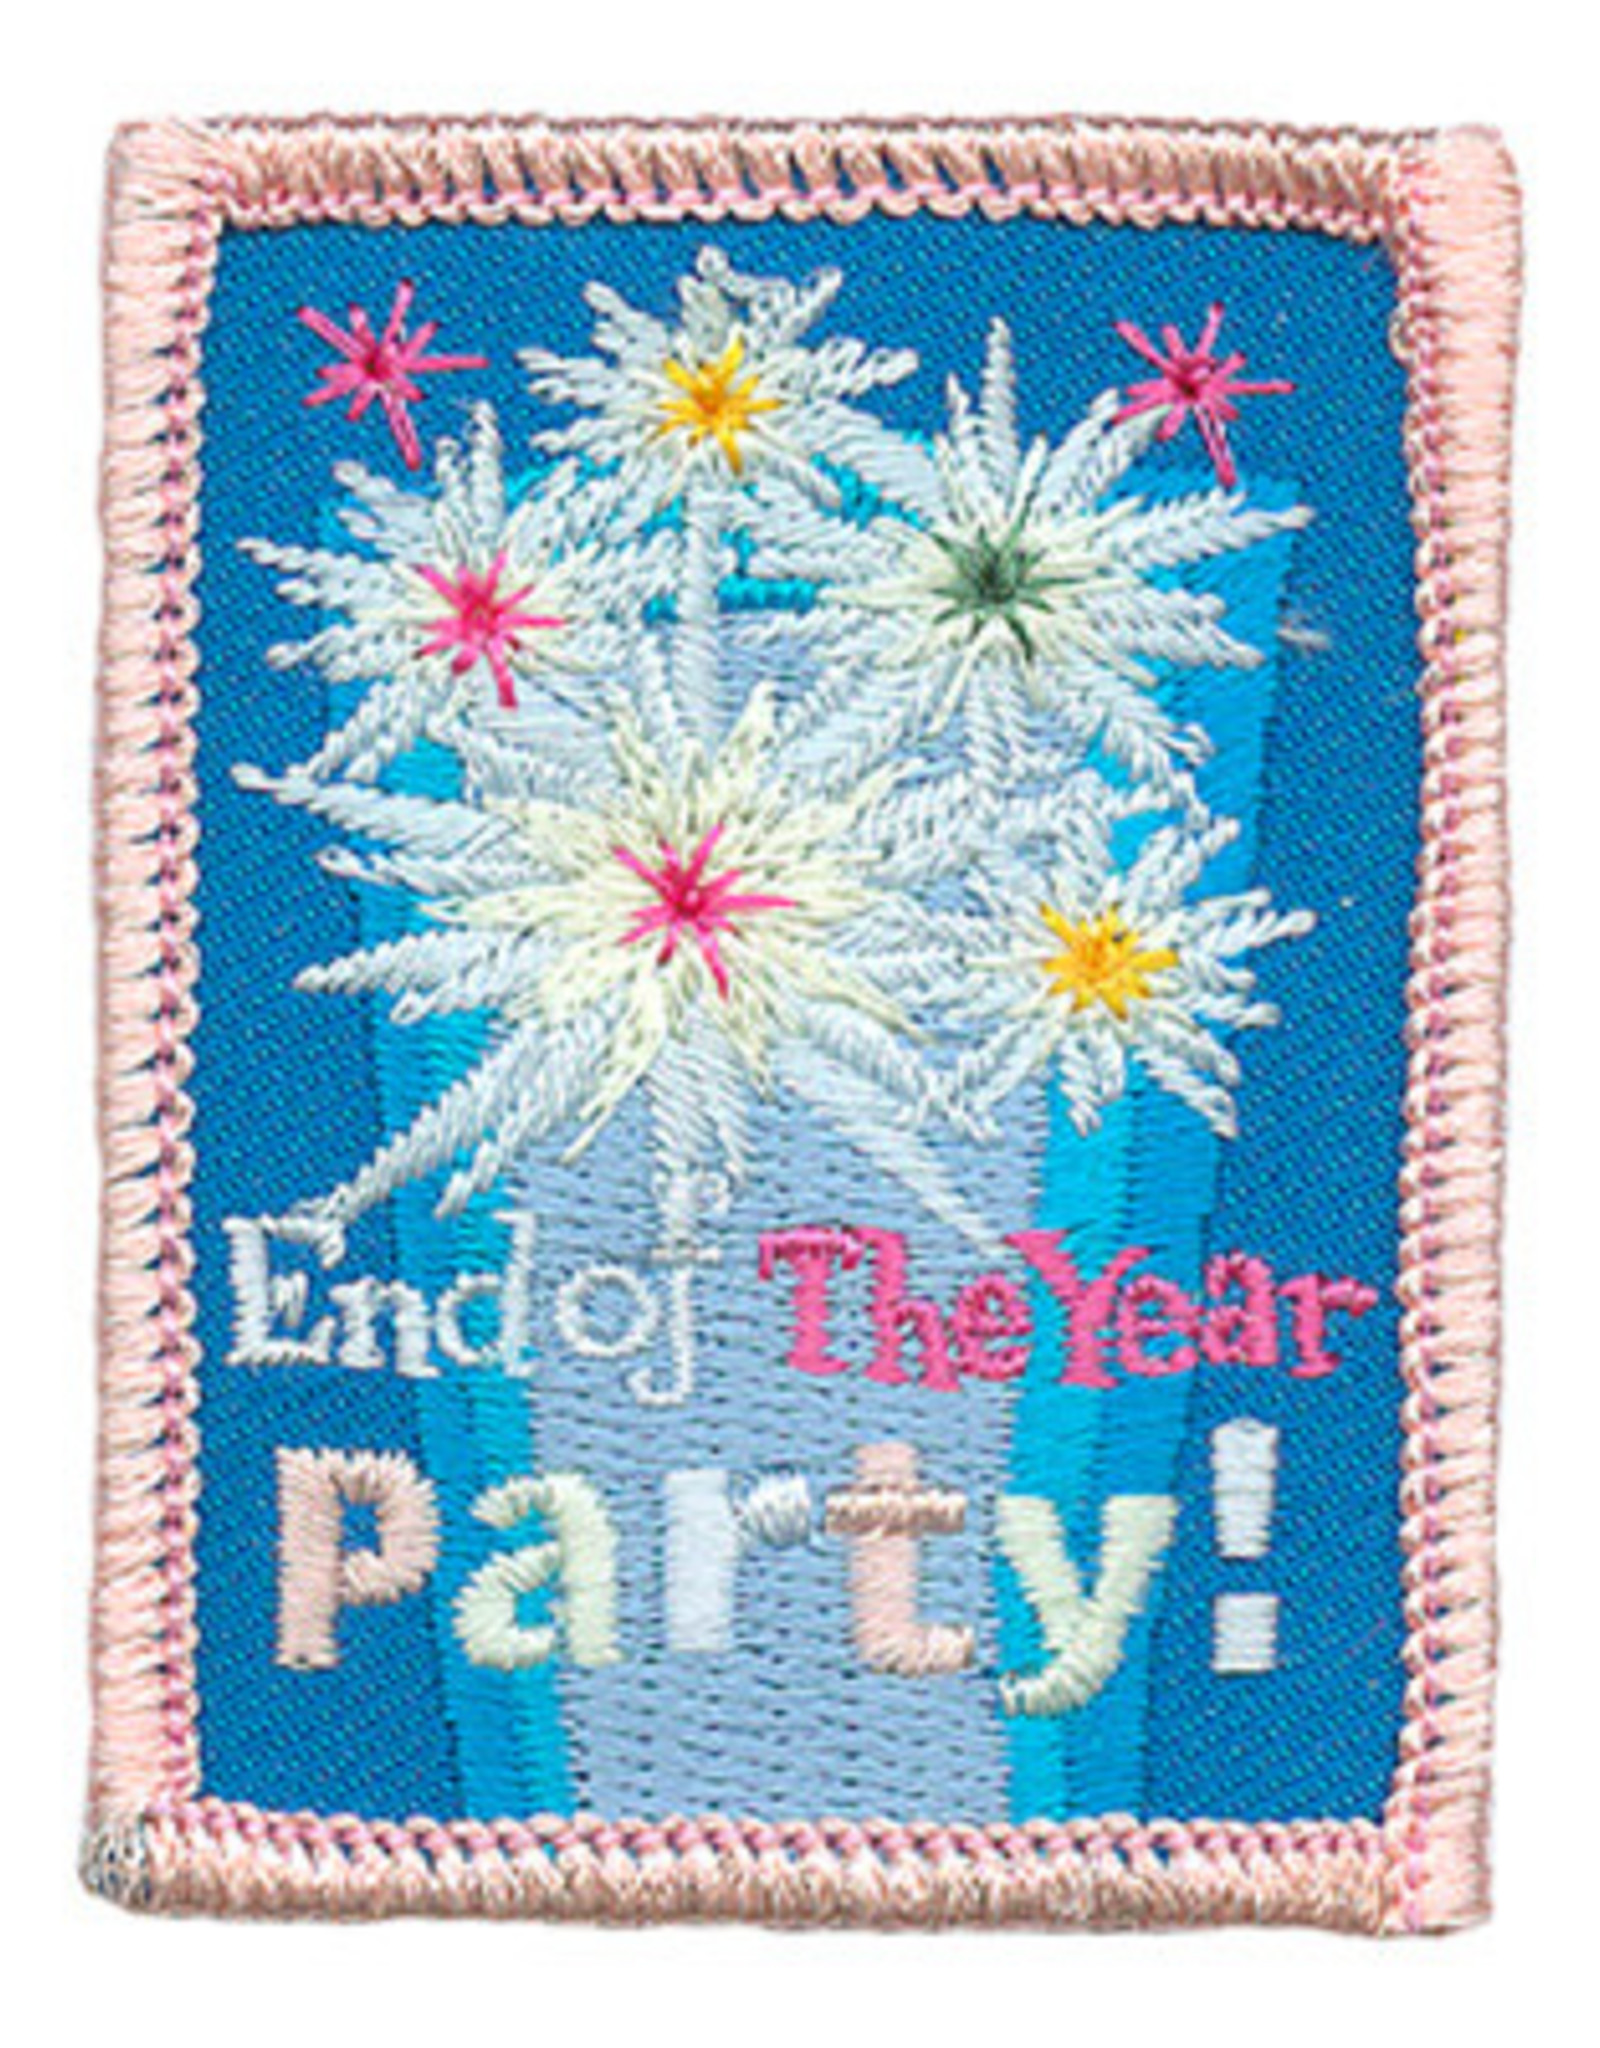 Advantage Emblem & Screen Prnt End Of The Year Party Fun Patch